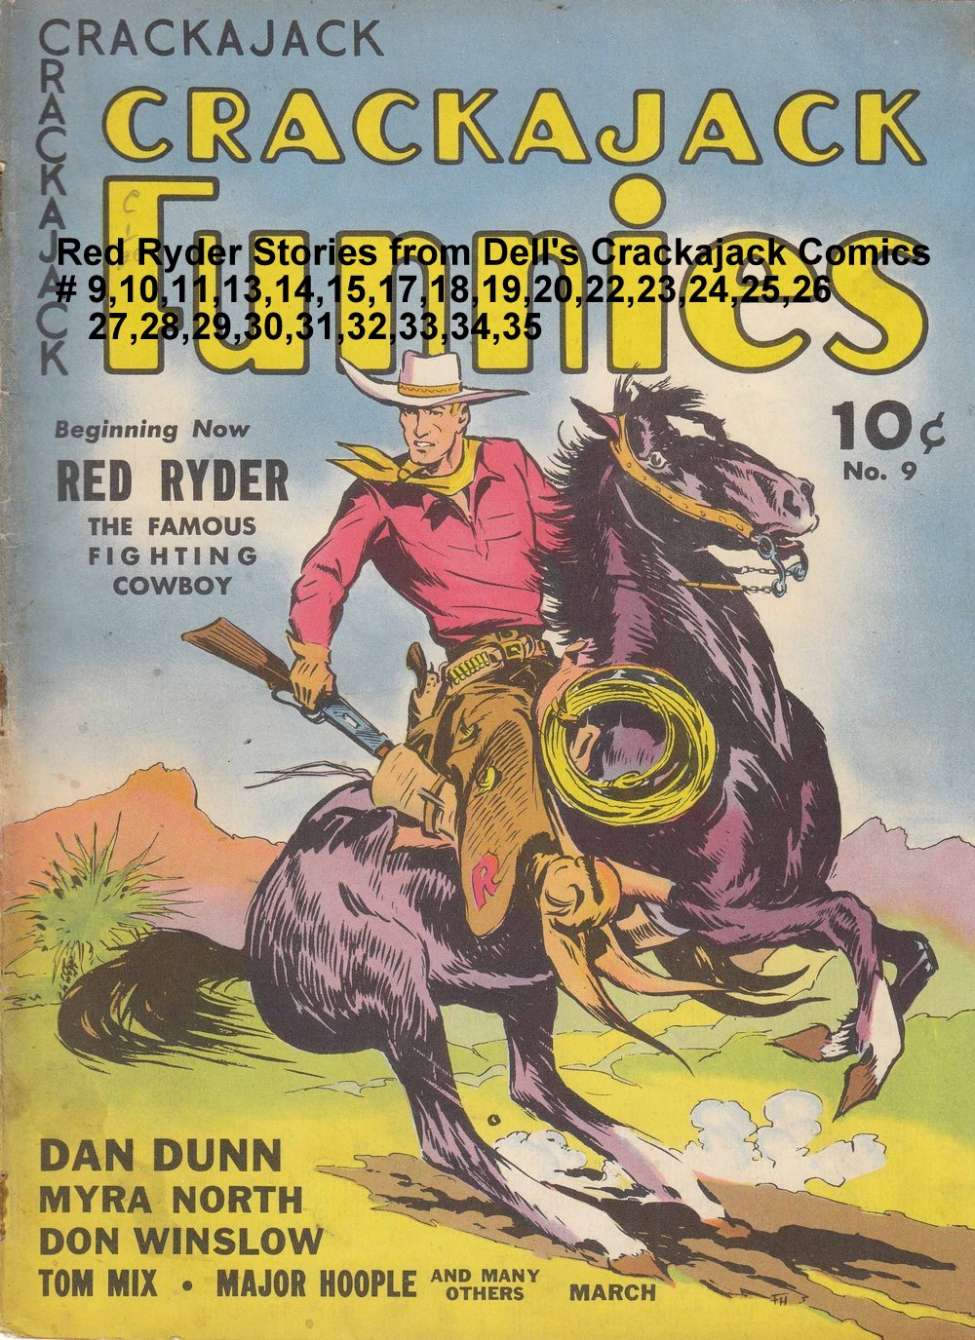 Book Cover For Red Ryder from Dell's Crackajack Comics (1939-41)